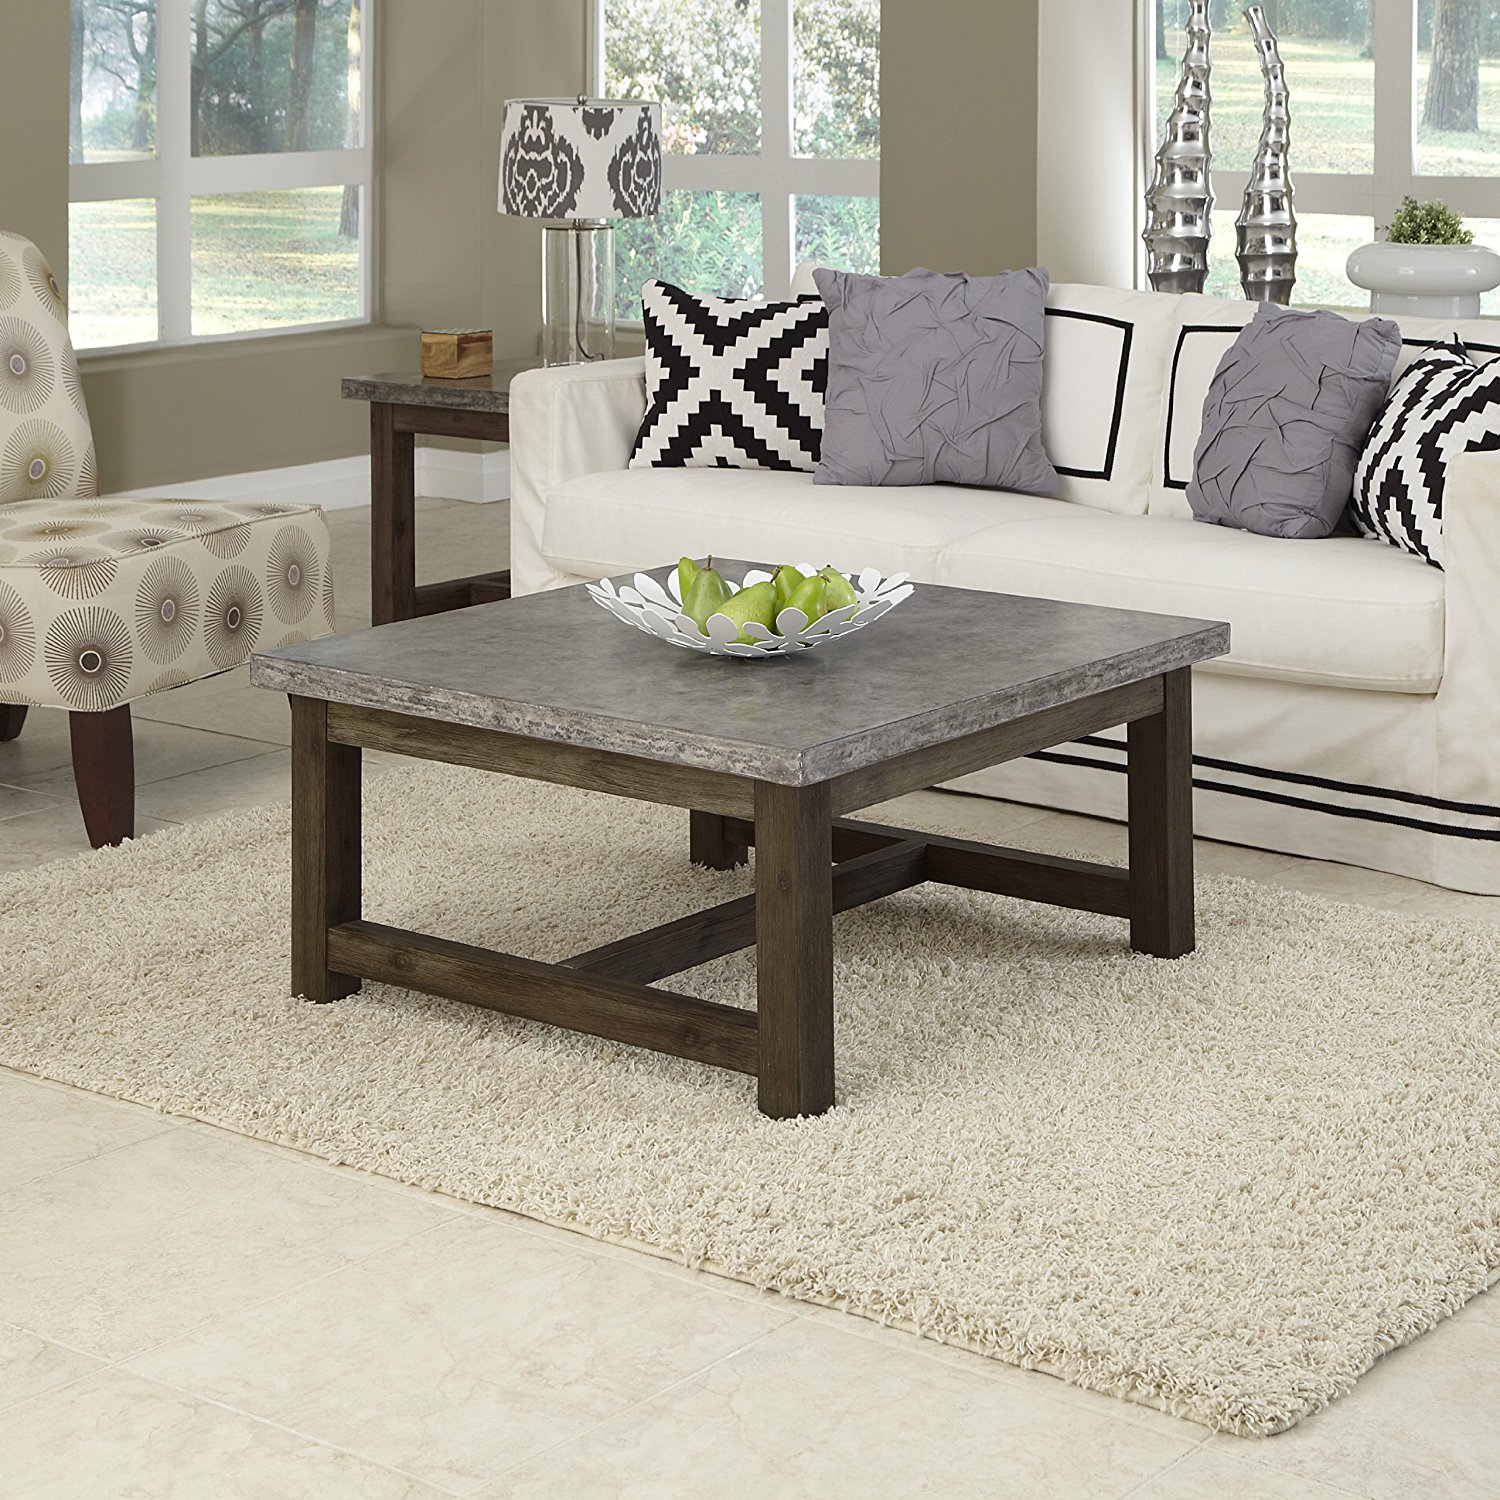 furniture square coffee table with marble top and wooden legs white rug fabric sofa throw pillows ceramic floor side glass urn lamp cream accent chair full size awesome designs